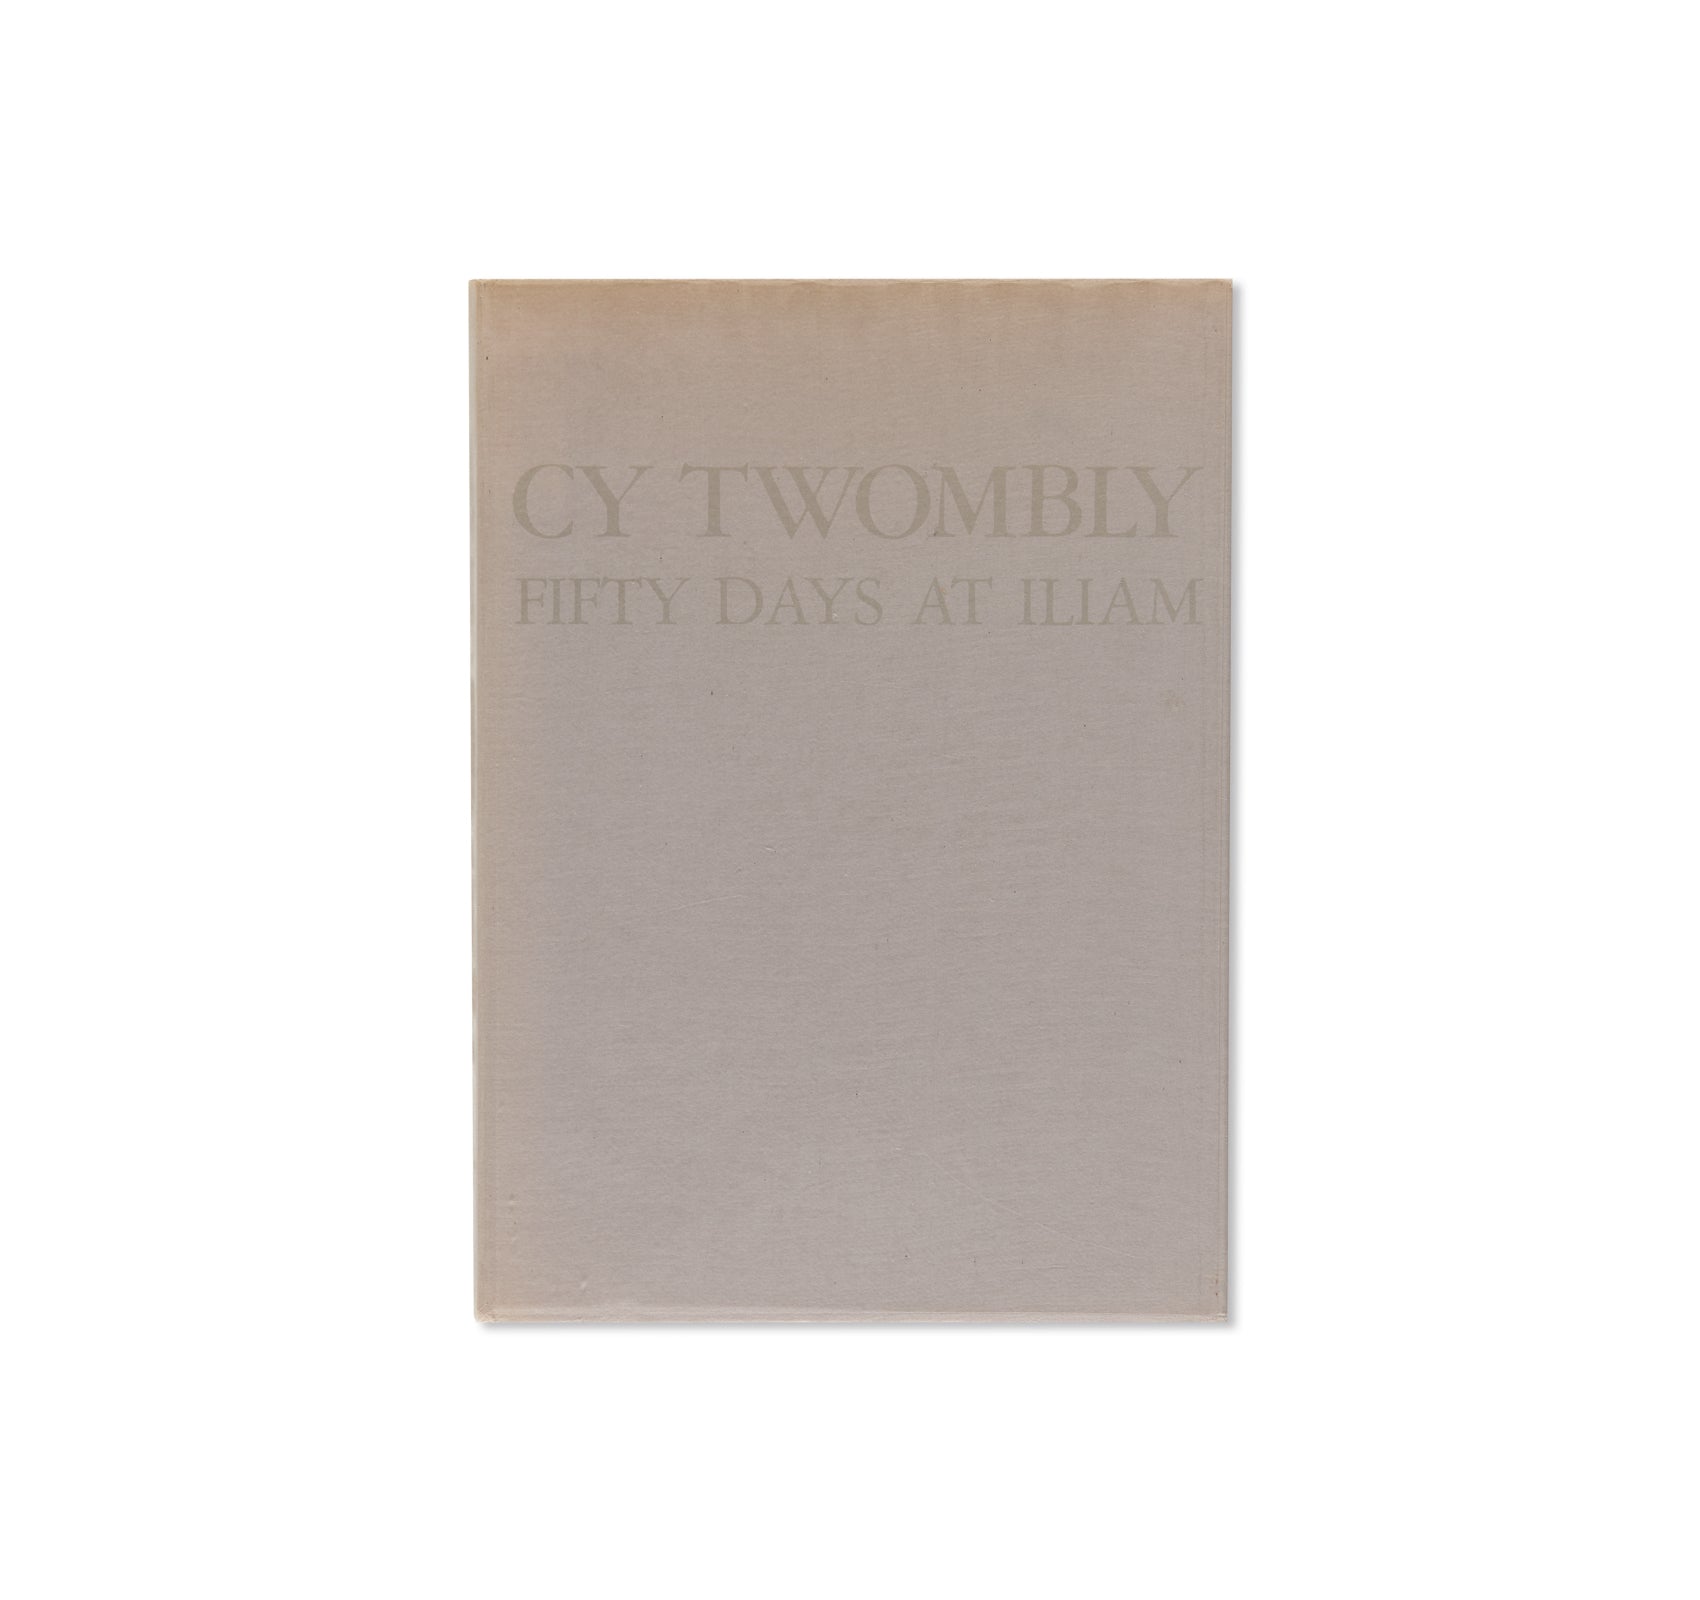 FIFTY DAYS AT ILIAM by Cy Twombly [FIRST EDITION]